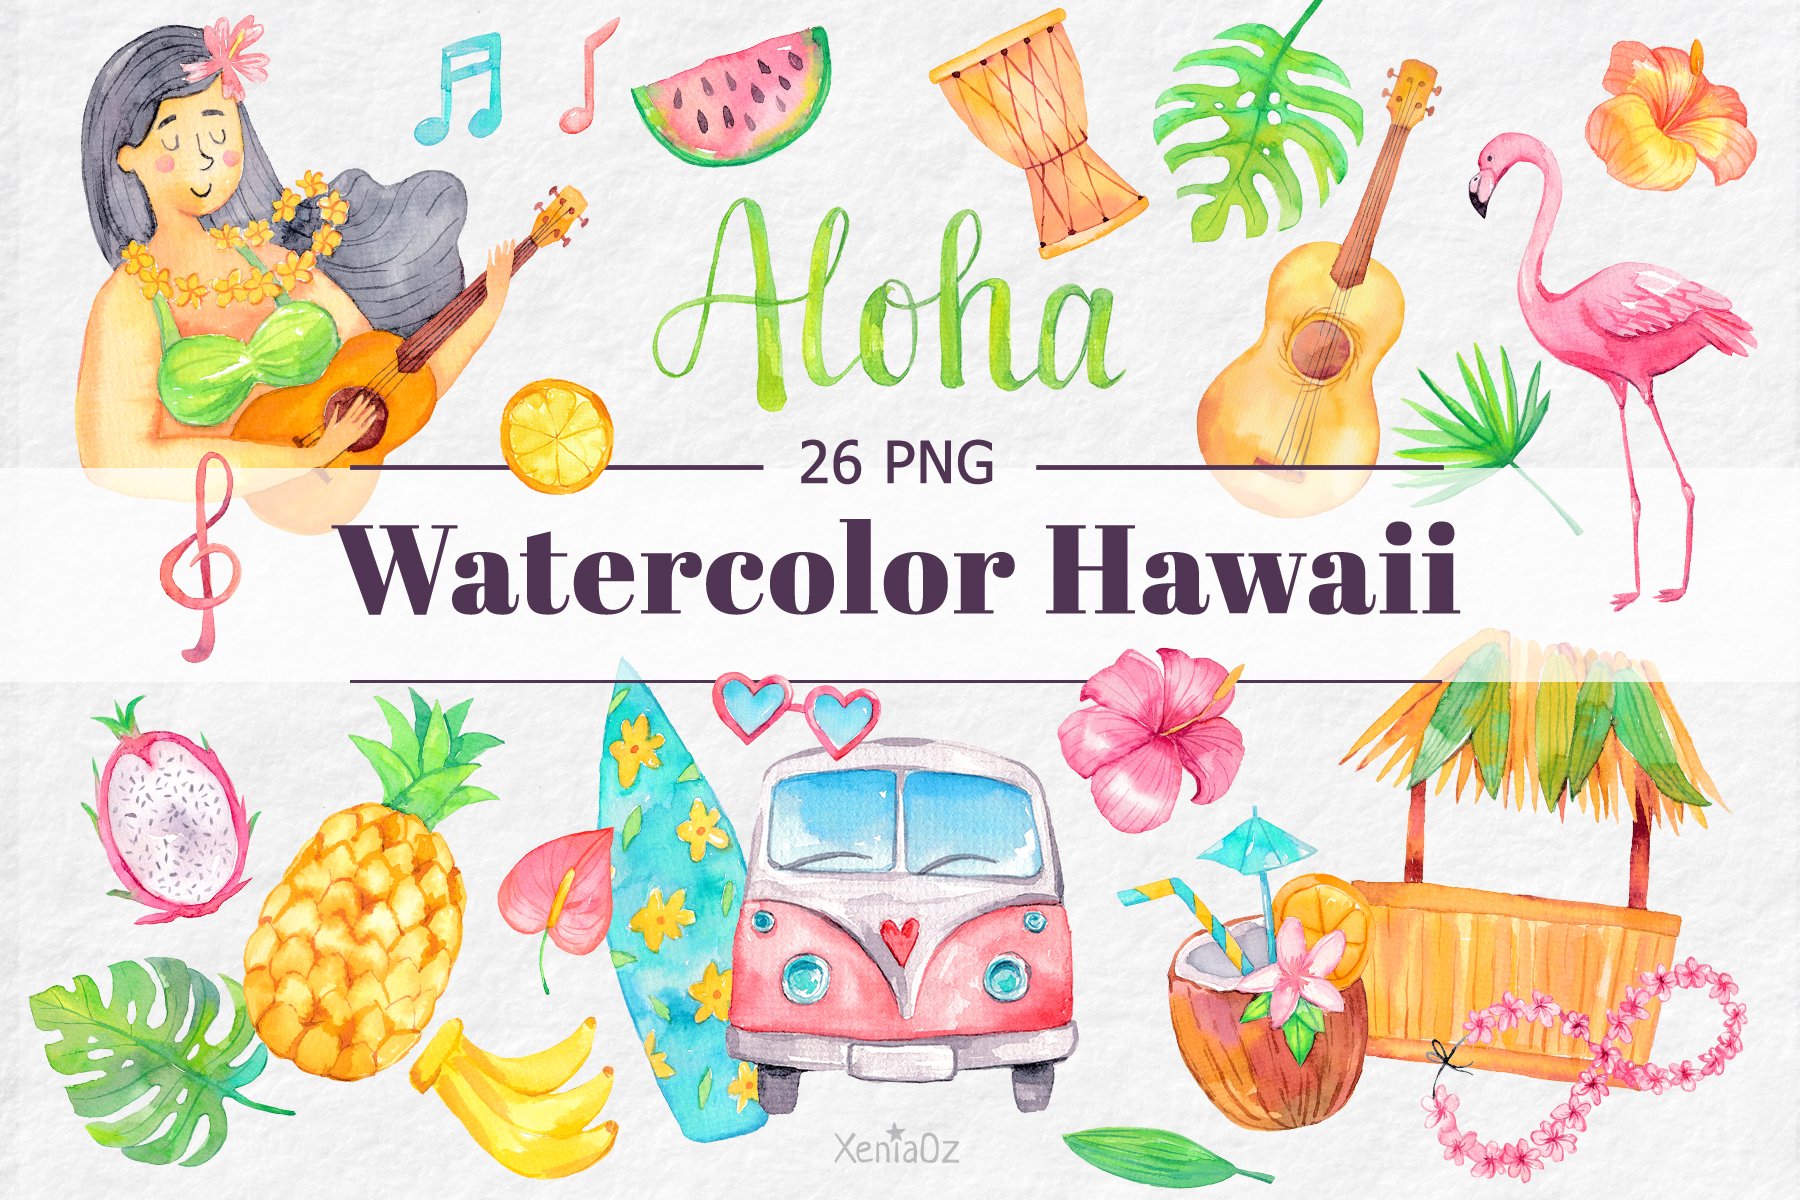 Watercolor Tropical Hawaii Clipart cover image.